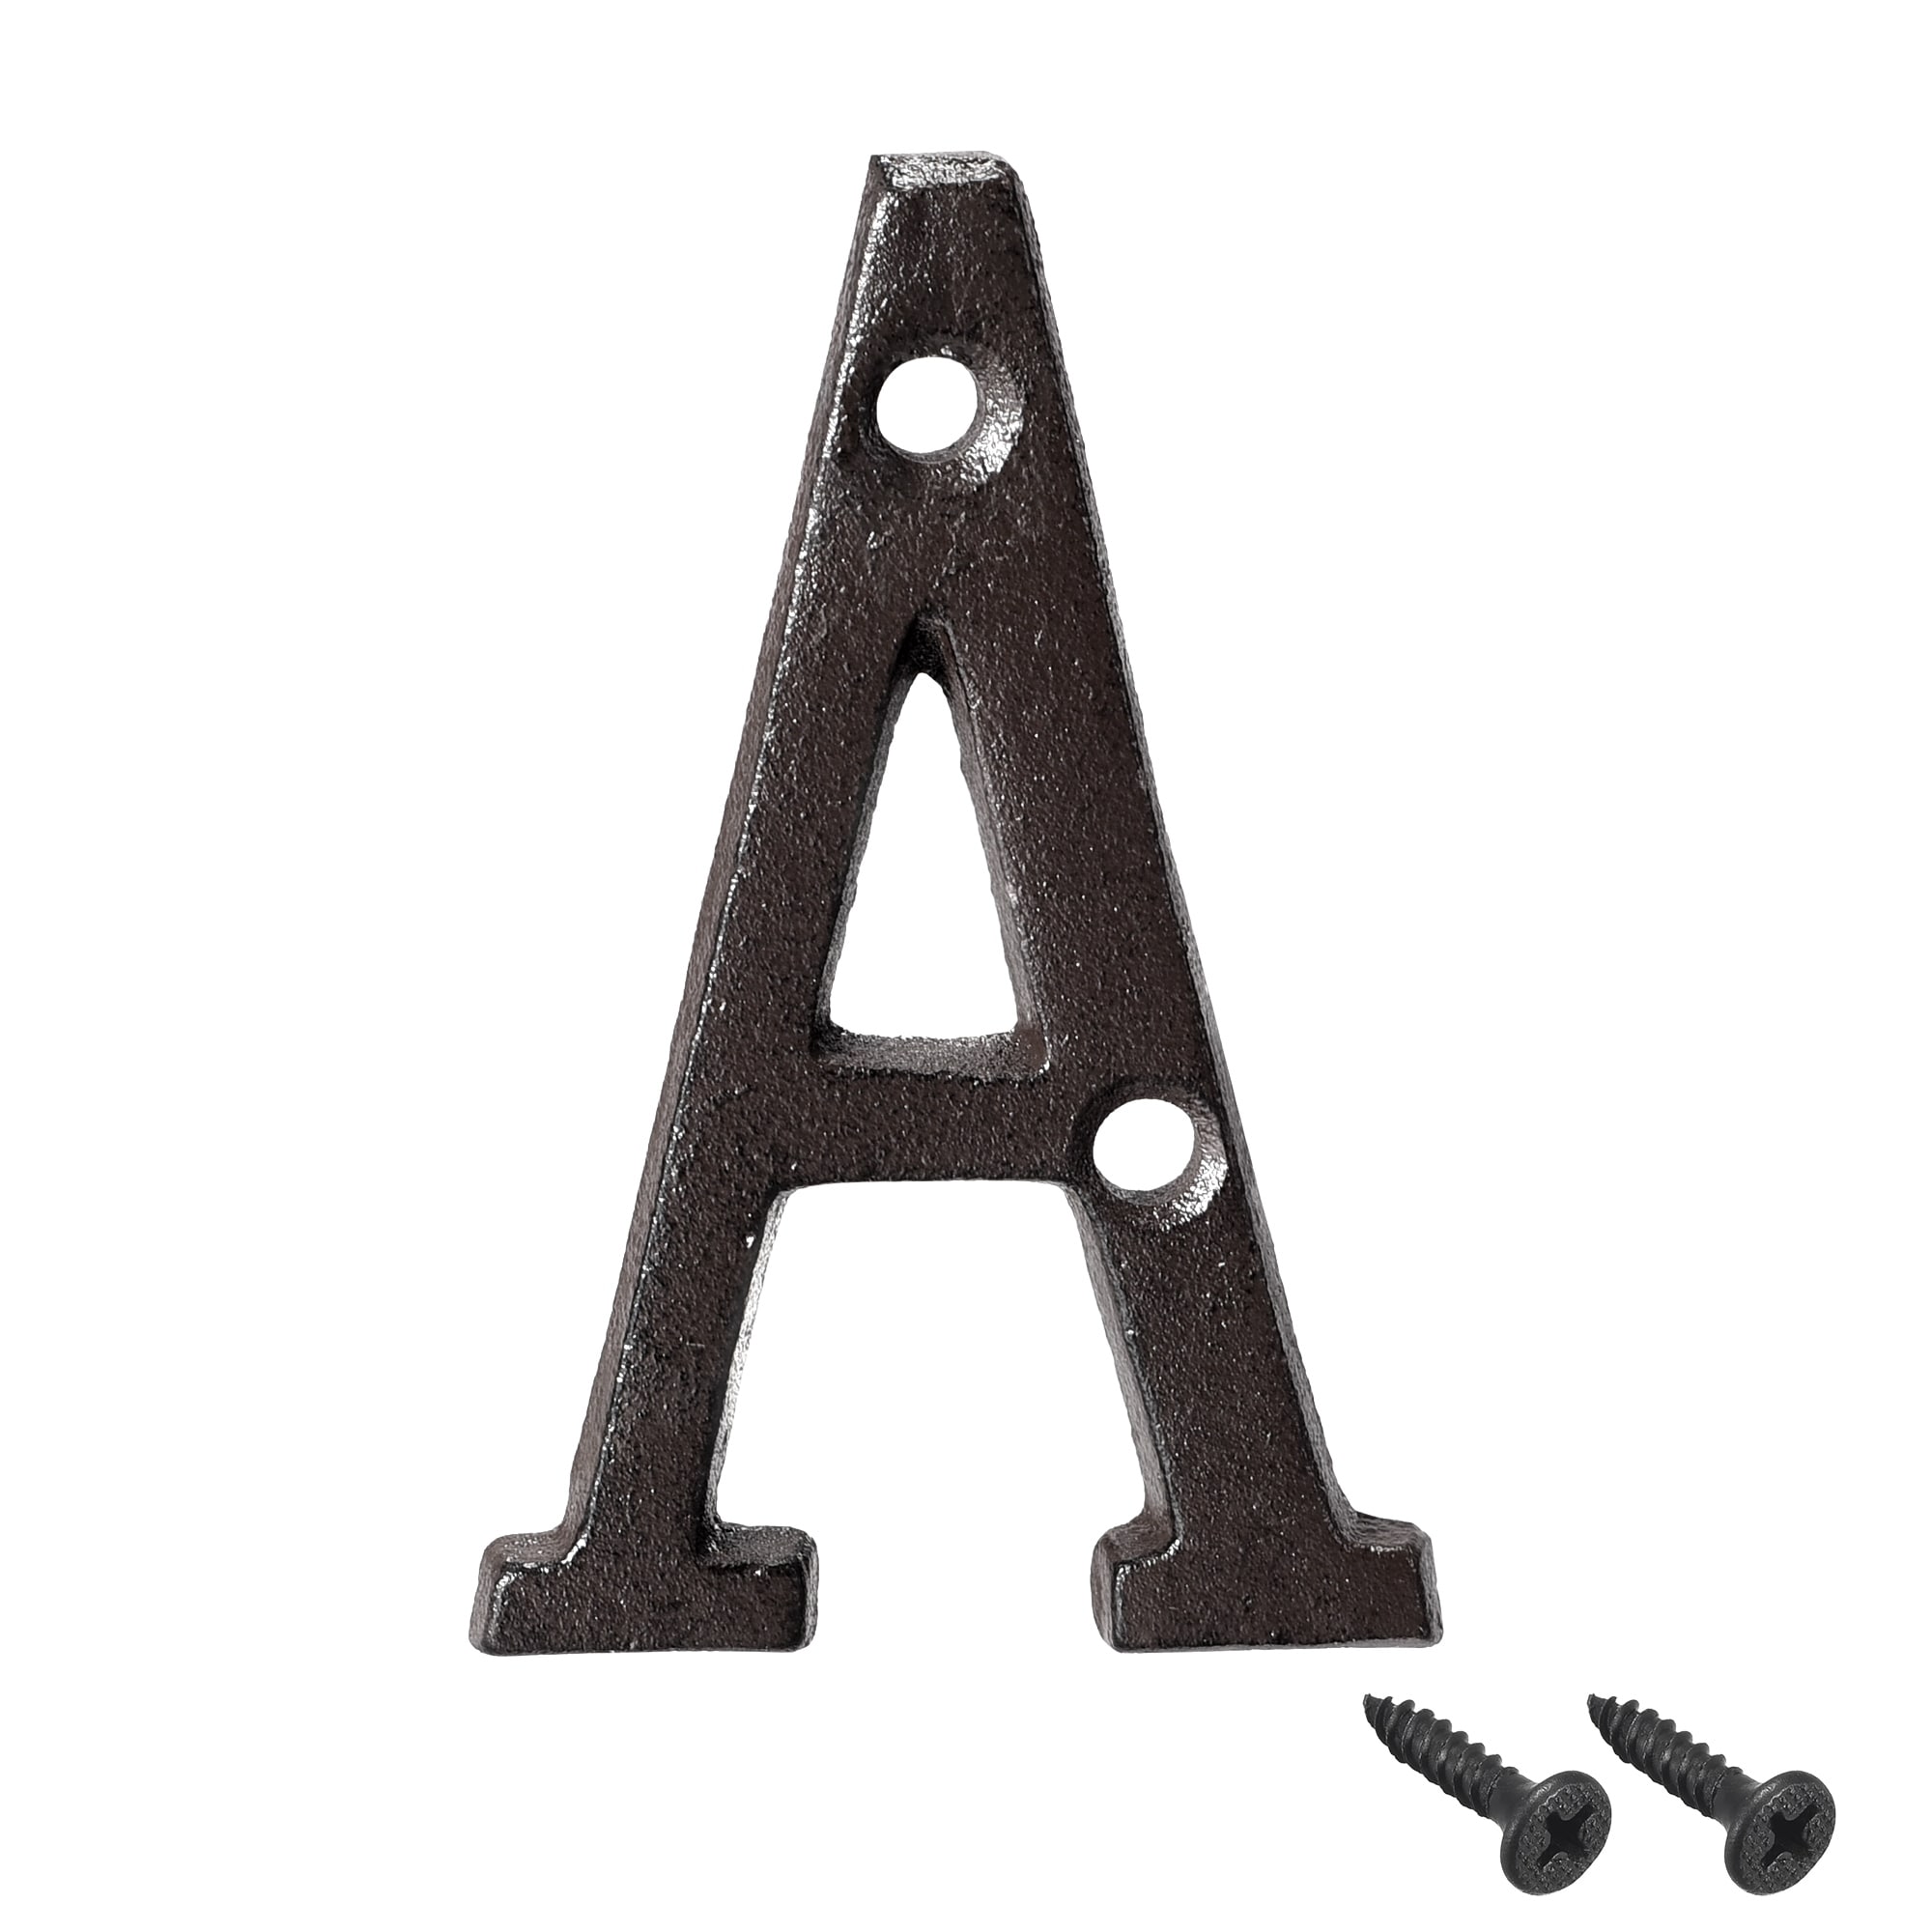 3-Inch Cast Iron Letters for Wall and Mailbox - Letter G - Industrial  Design Mailbox Letters for Address Sign and House Decor - Black Brown